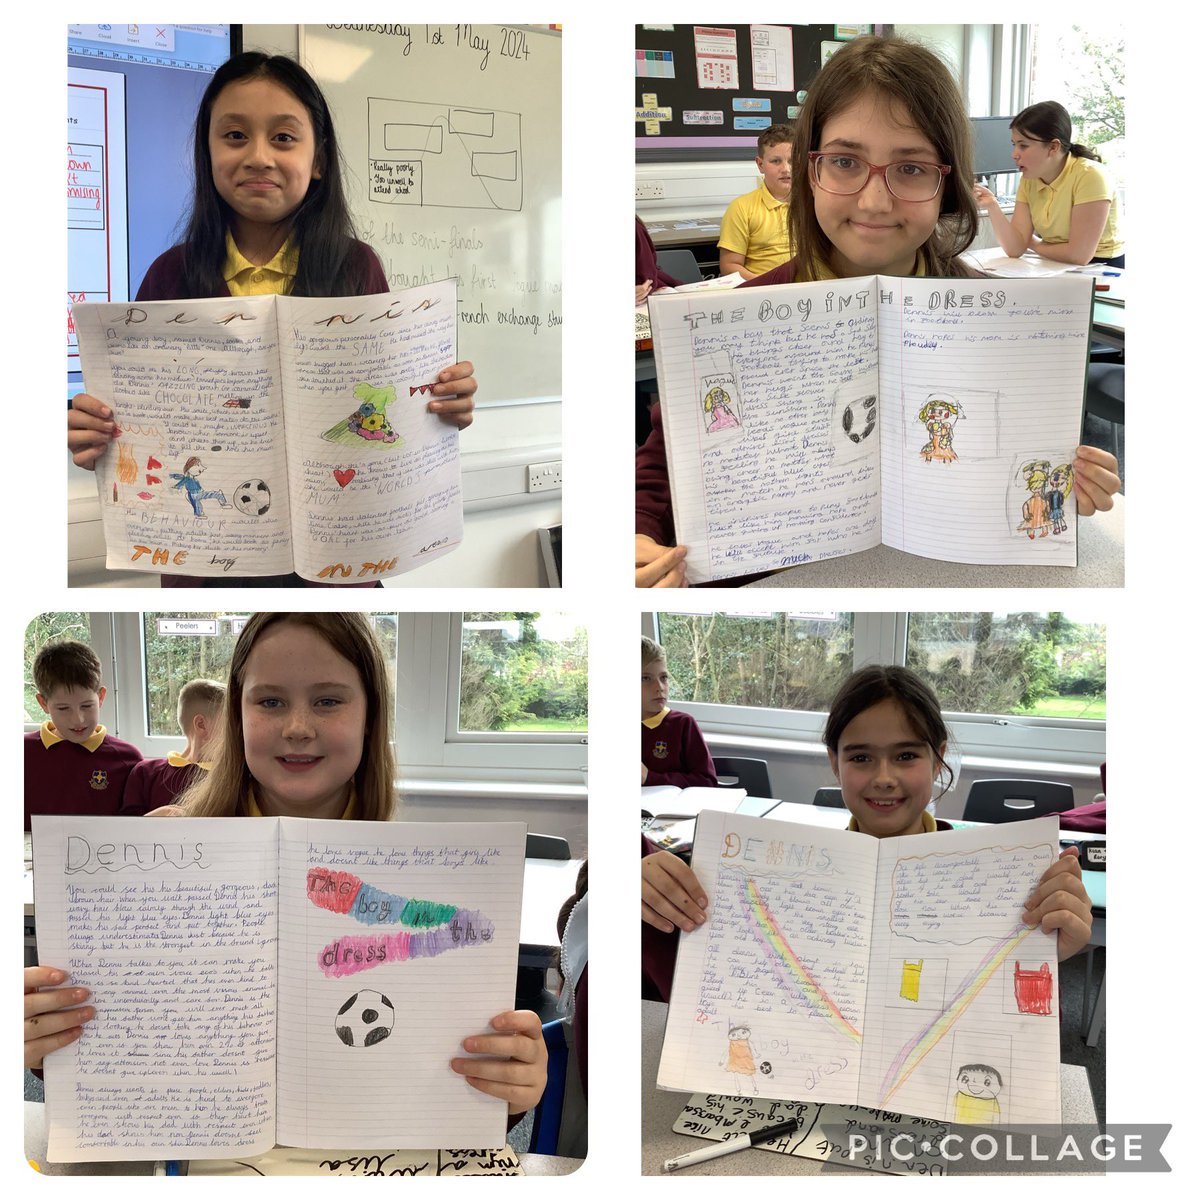 A little snippet of some of our beautiful character descriptions after editing and improving ✏️ #year5 #writing #vocabulary